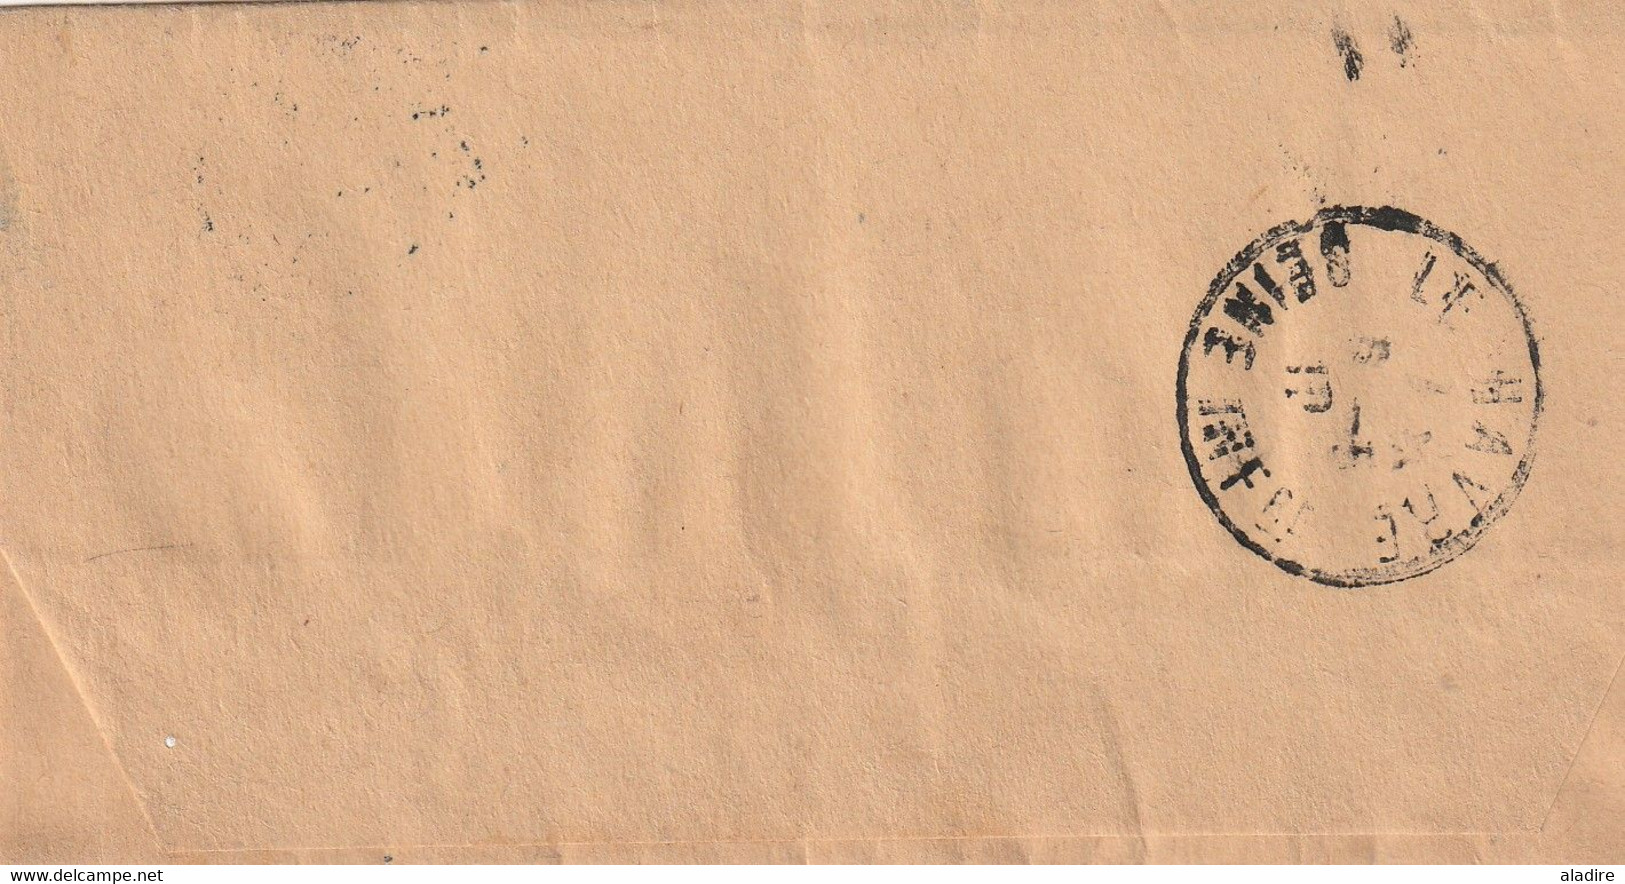 1910 - KEVII 1/2 D Newspaper Wrapper Stationery From Liverpool To Le Havre, France - Arrival Stamp - Covers & Documents